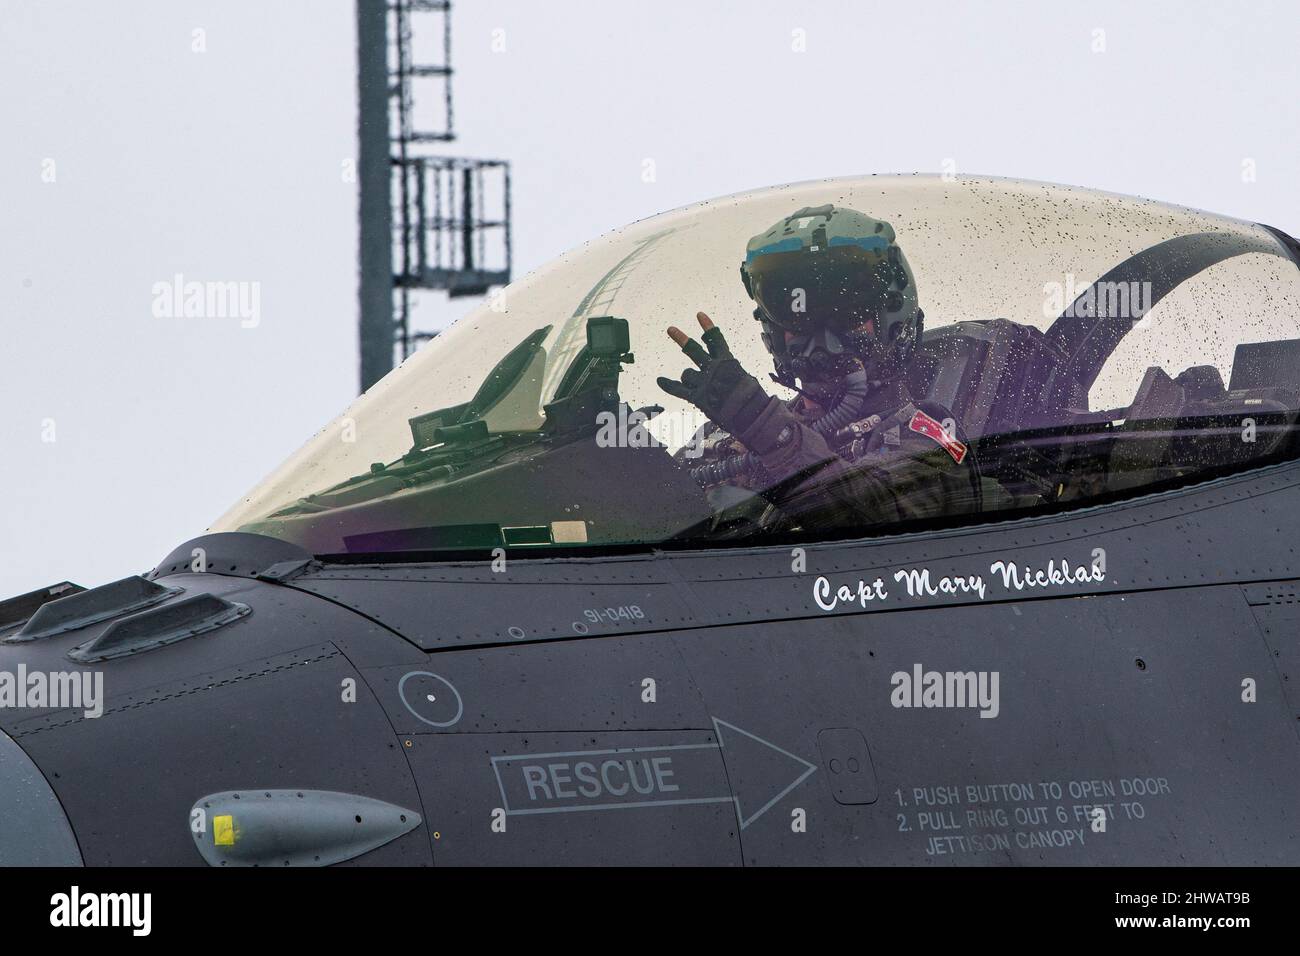 A U.S. Air Force F-16 Fighting Falcon pilot from the 480th Expeditionary Fighter Squadron at Spangdahlem Air Base, Germany, prepares to take off at the 86th Air Base, Romania, March 1, 2022. The ability to deploy air forces at short notice to host airbases or austere locations across NATO’s European area of responsibility is essential for timely and coordinated response for any contingency. (U.S. Air Force photo by Senior Airman Ali Stewart) Stock Photo